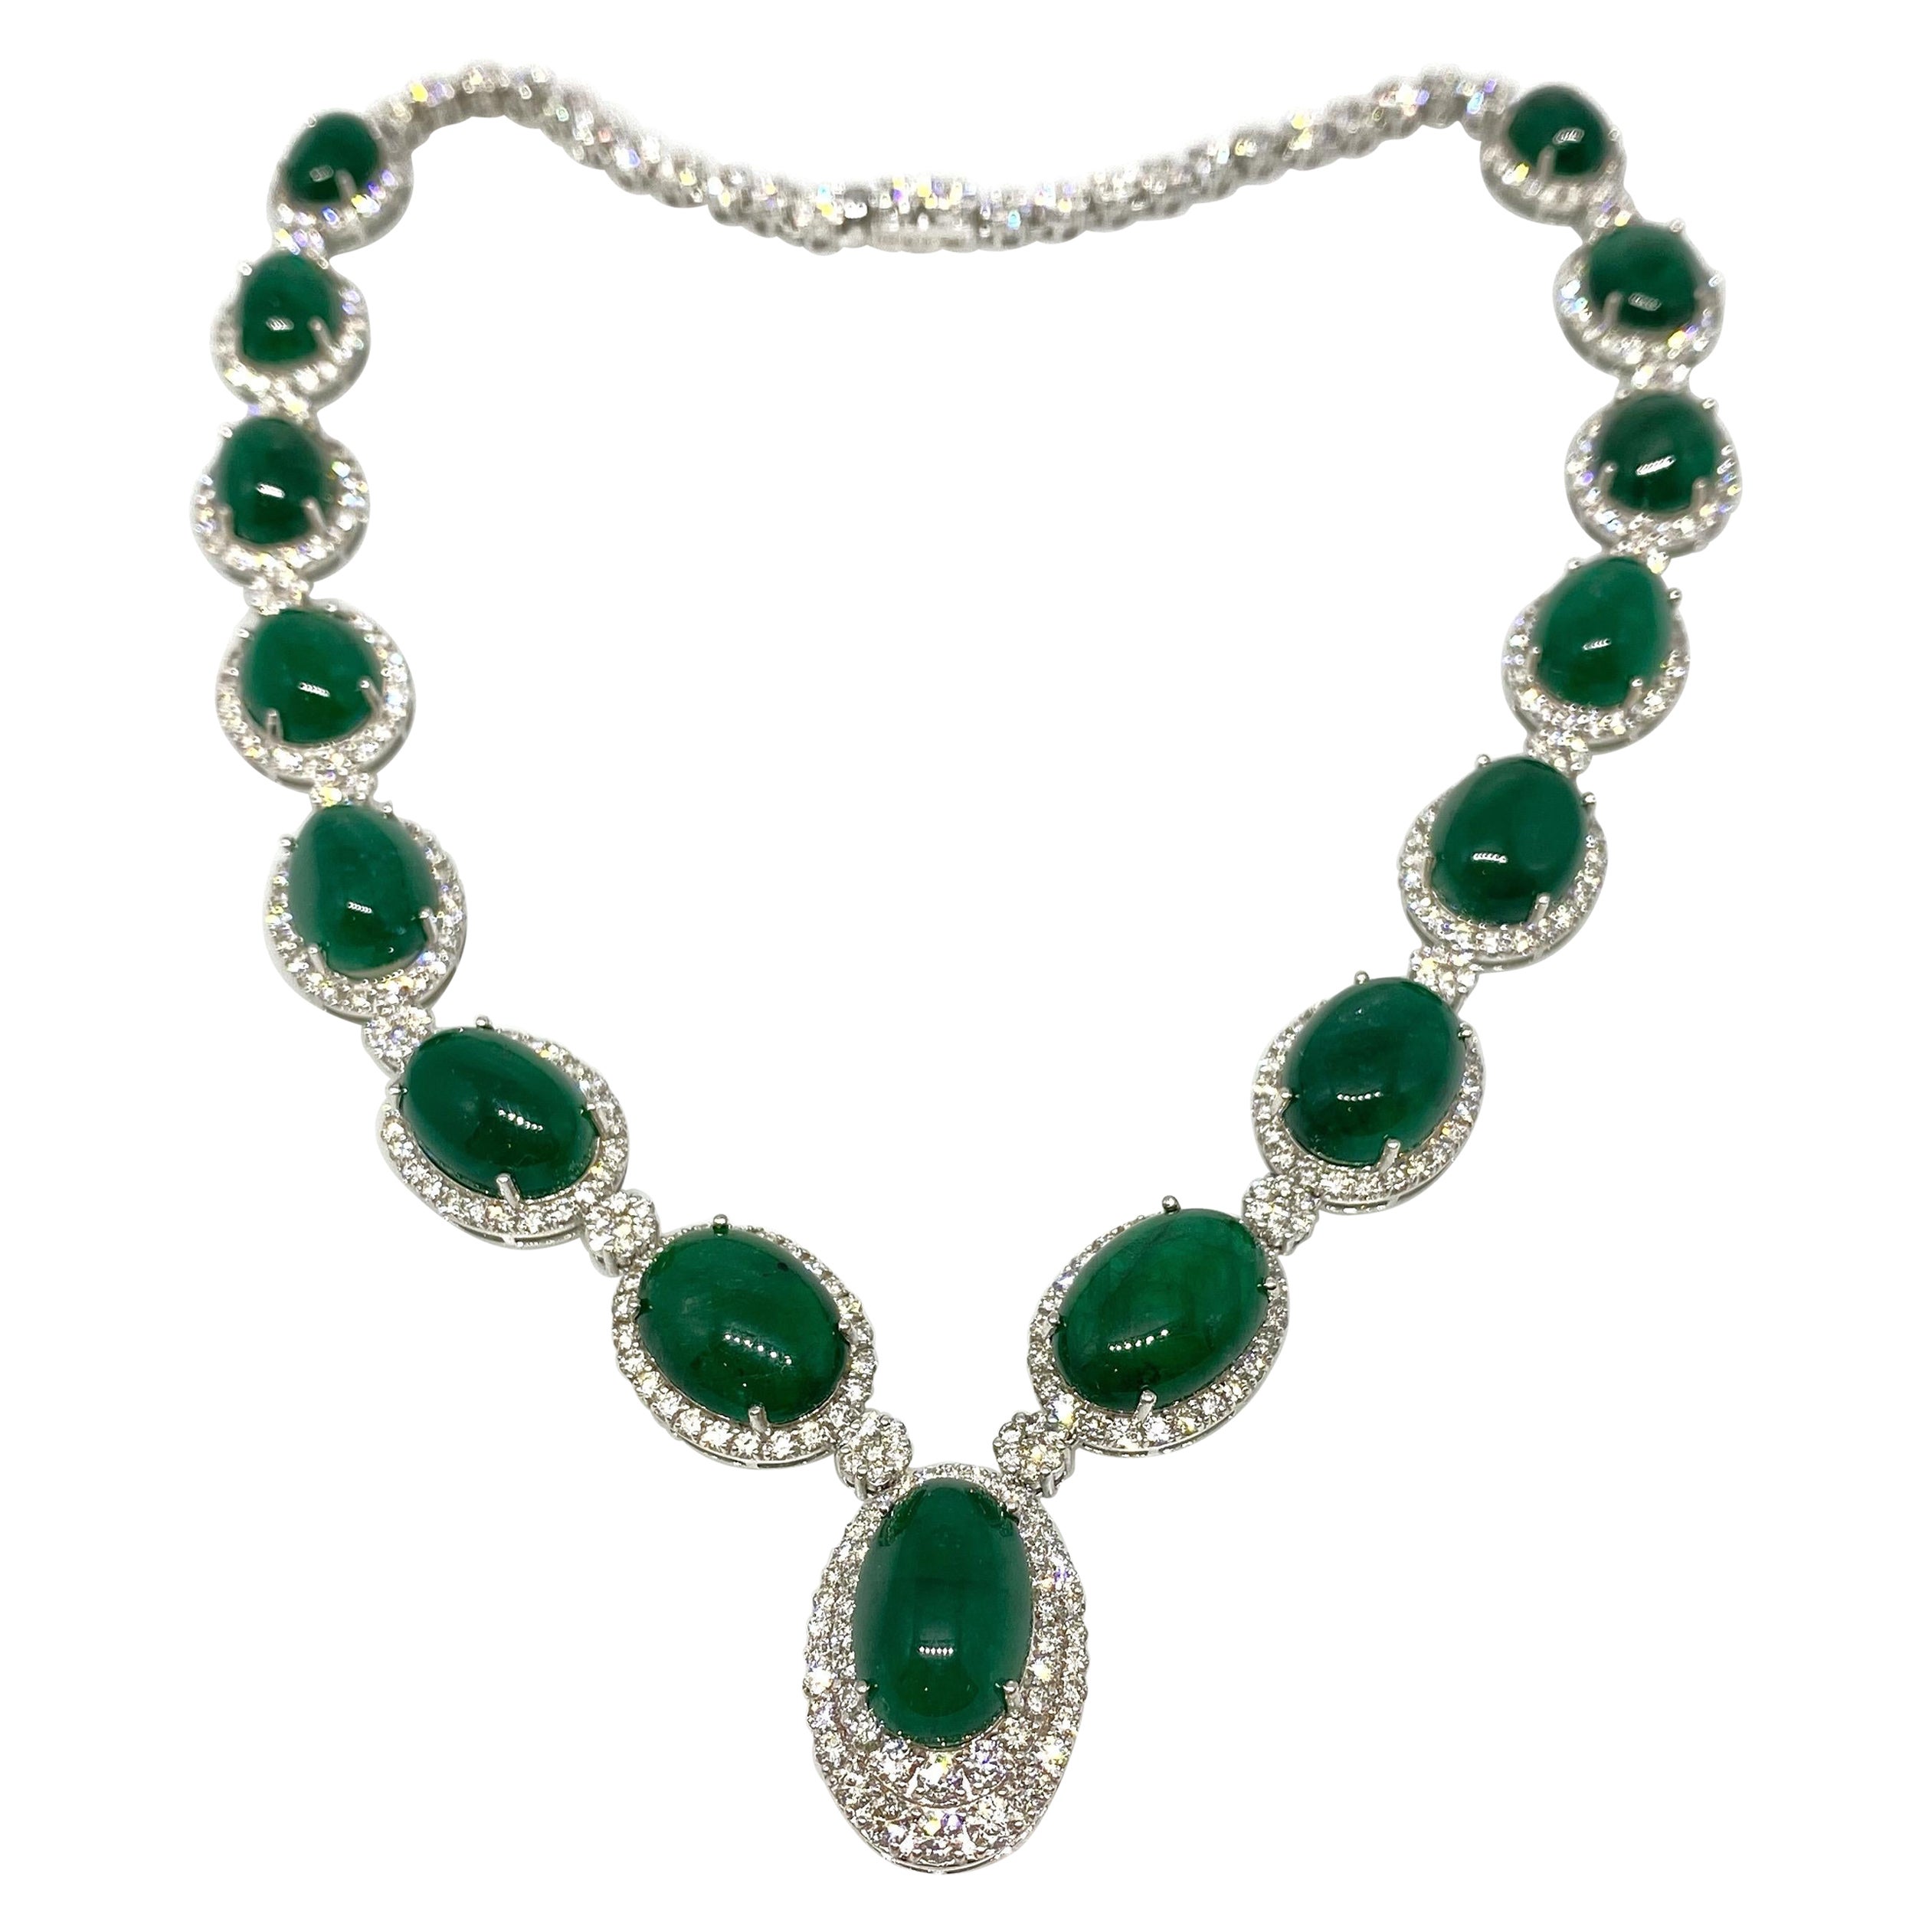 Cabochon Emerald and Diamond Necklace 100.00cttw in 18k White Gold